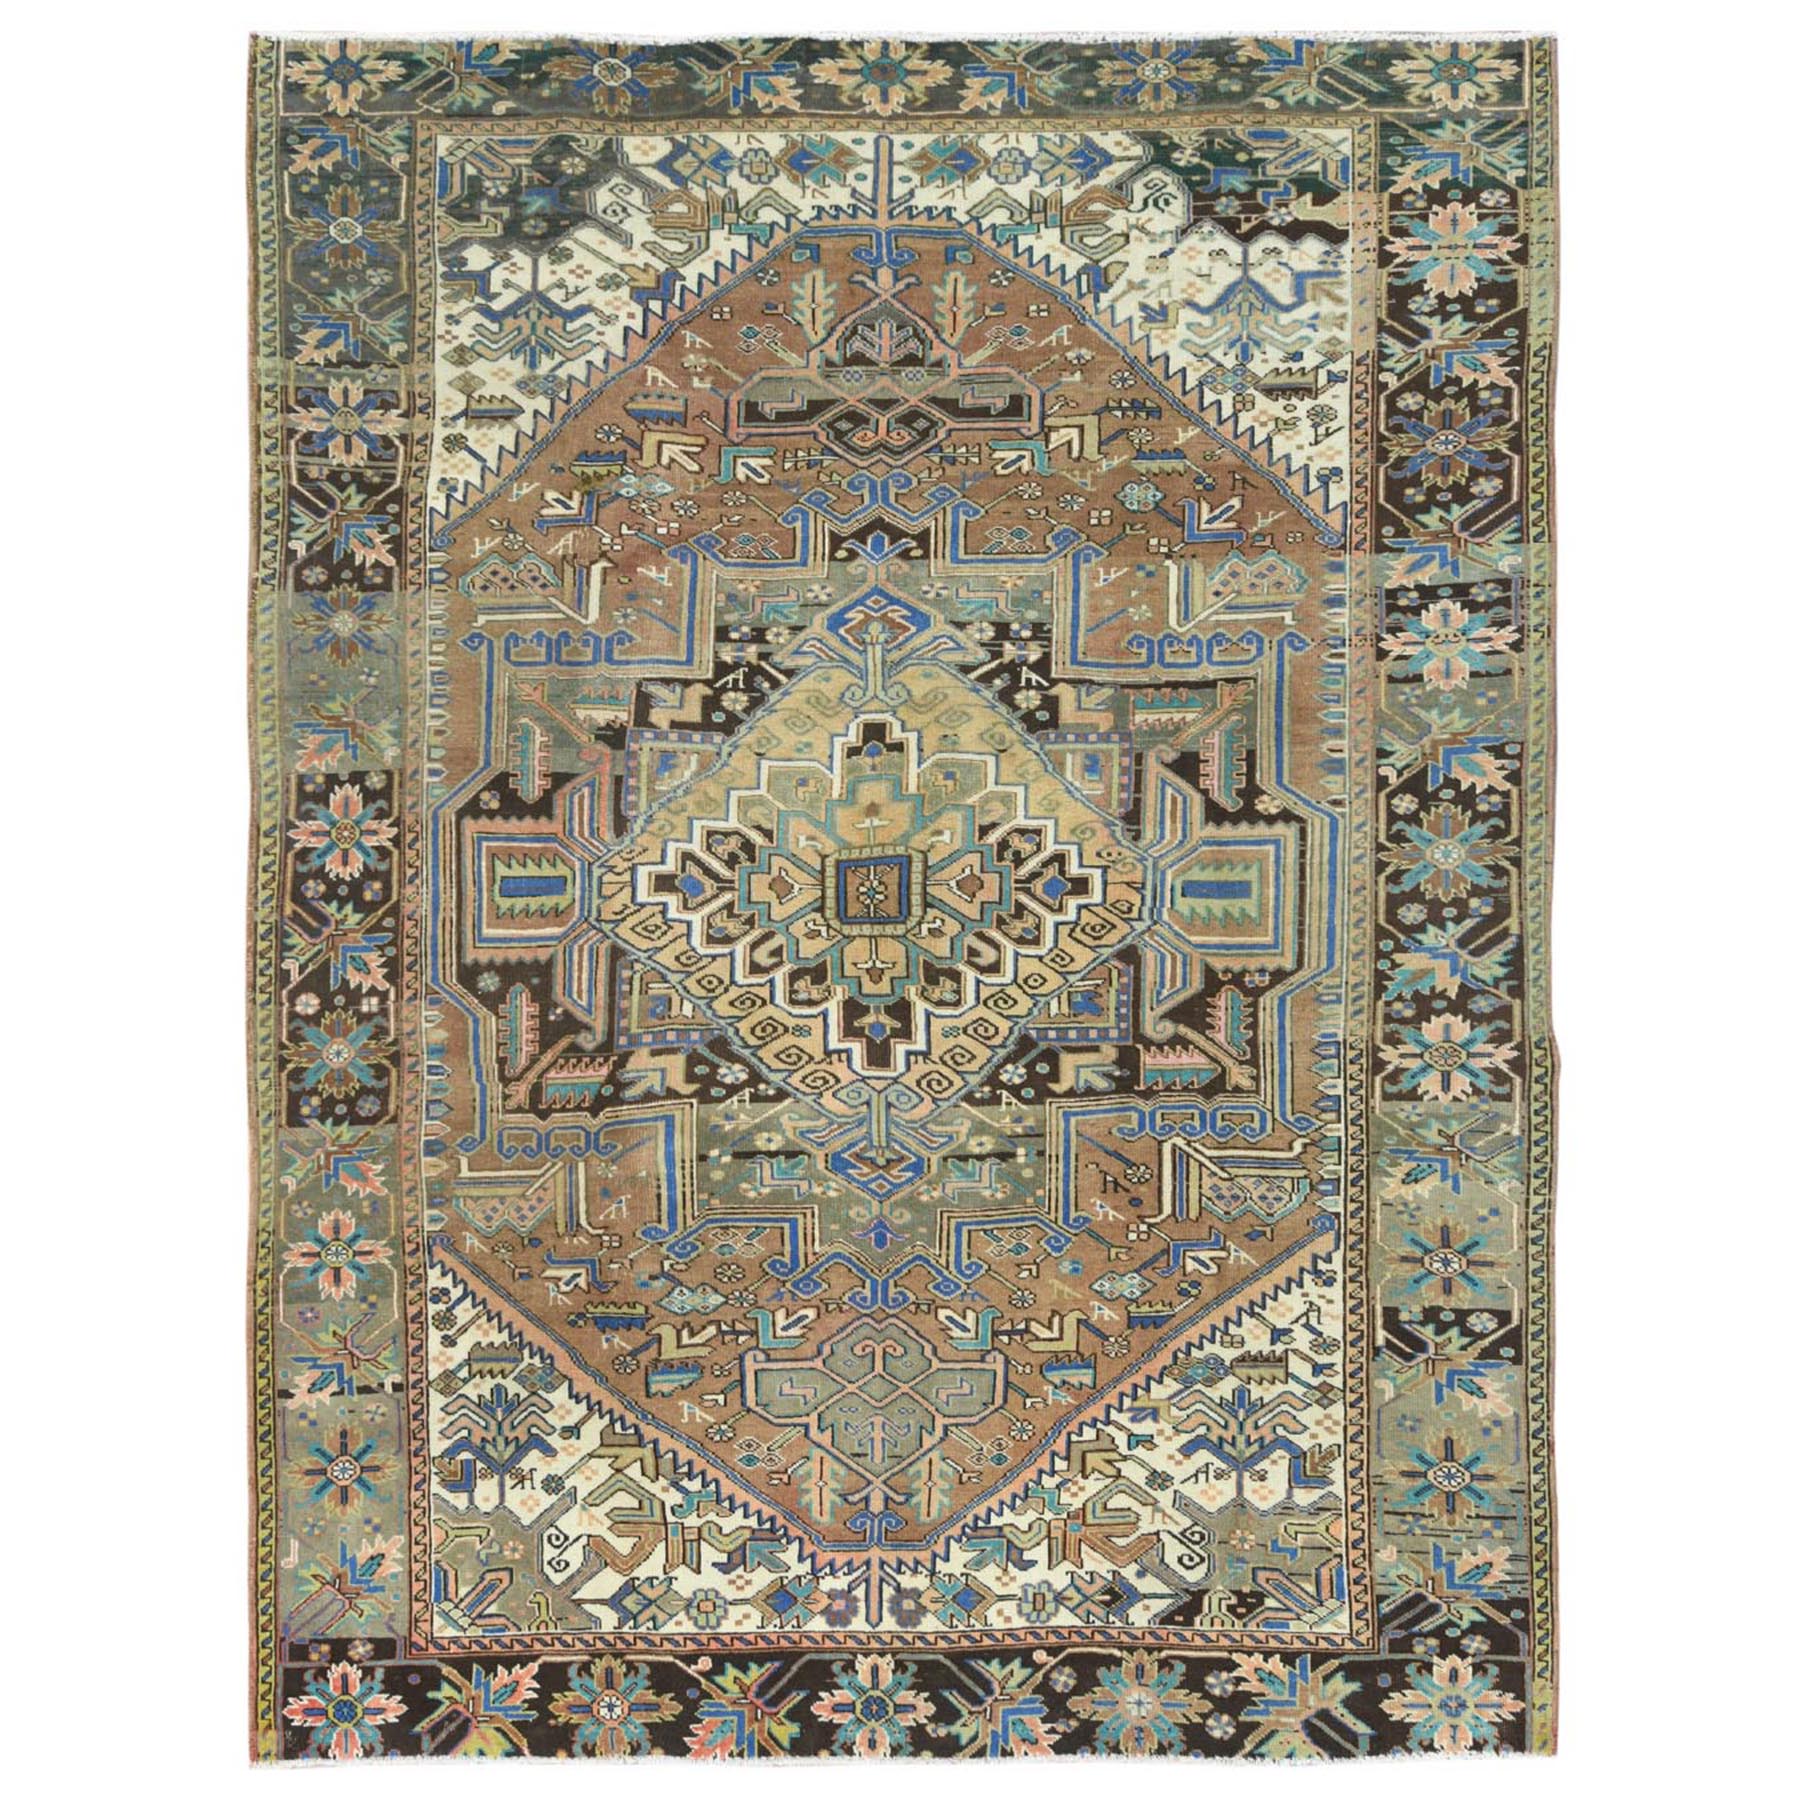  Wool Hand-Knotted Area Rug 7'10